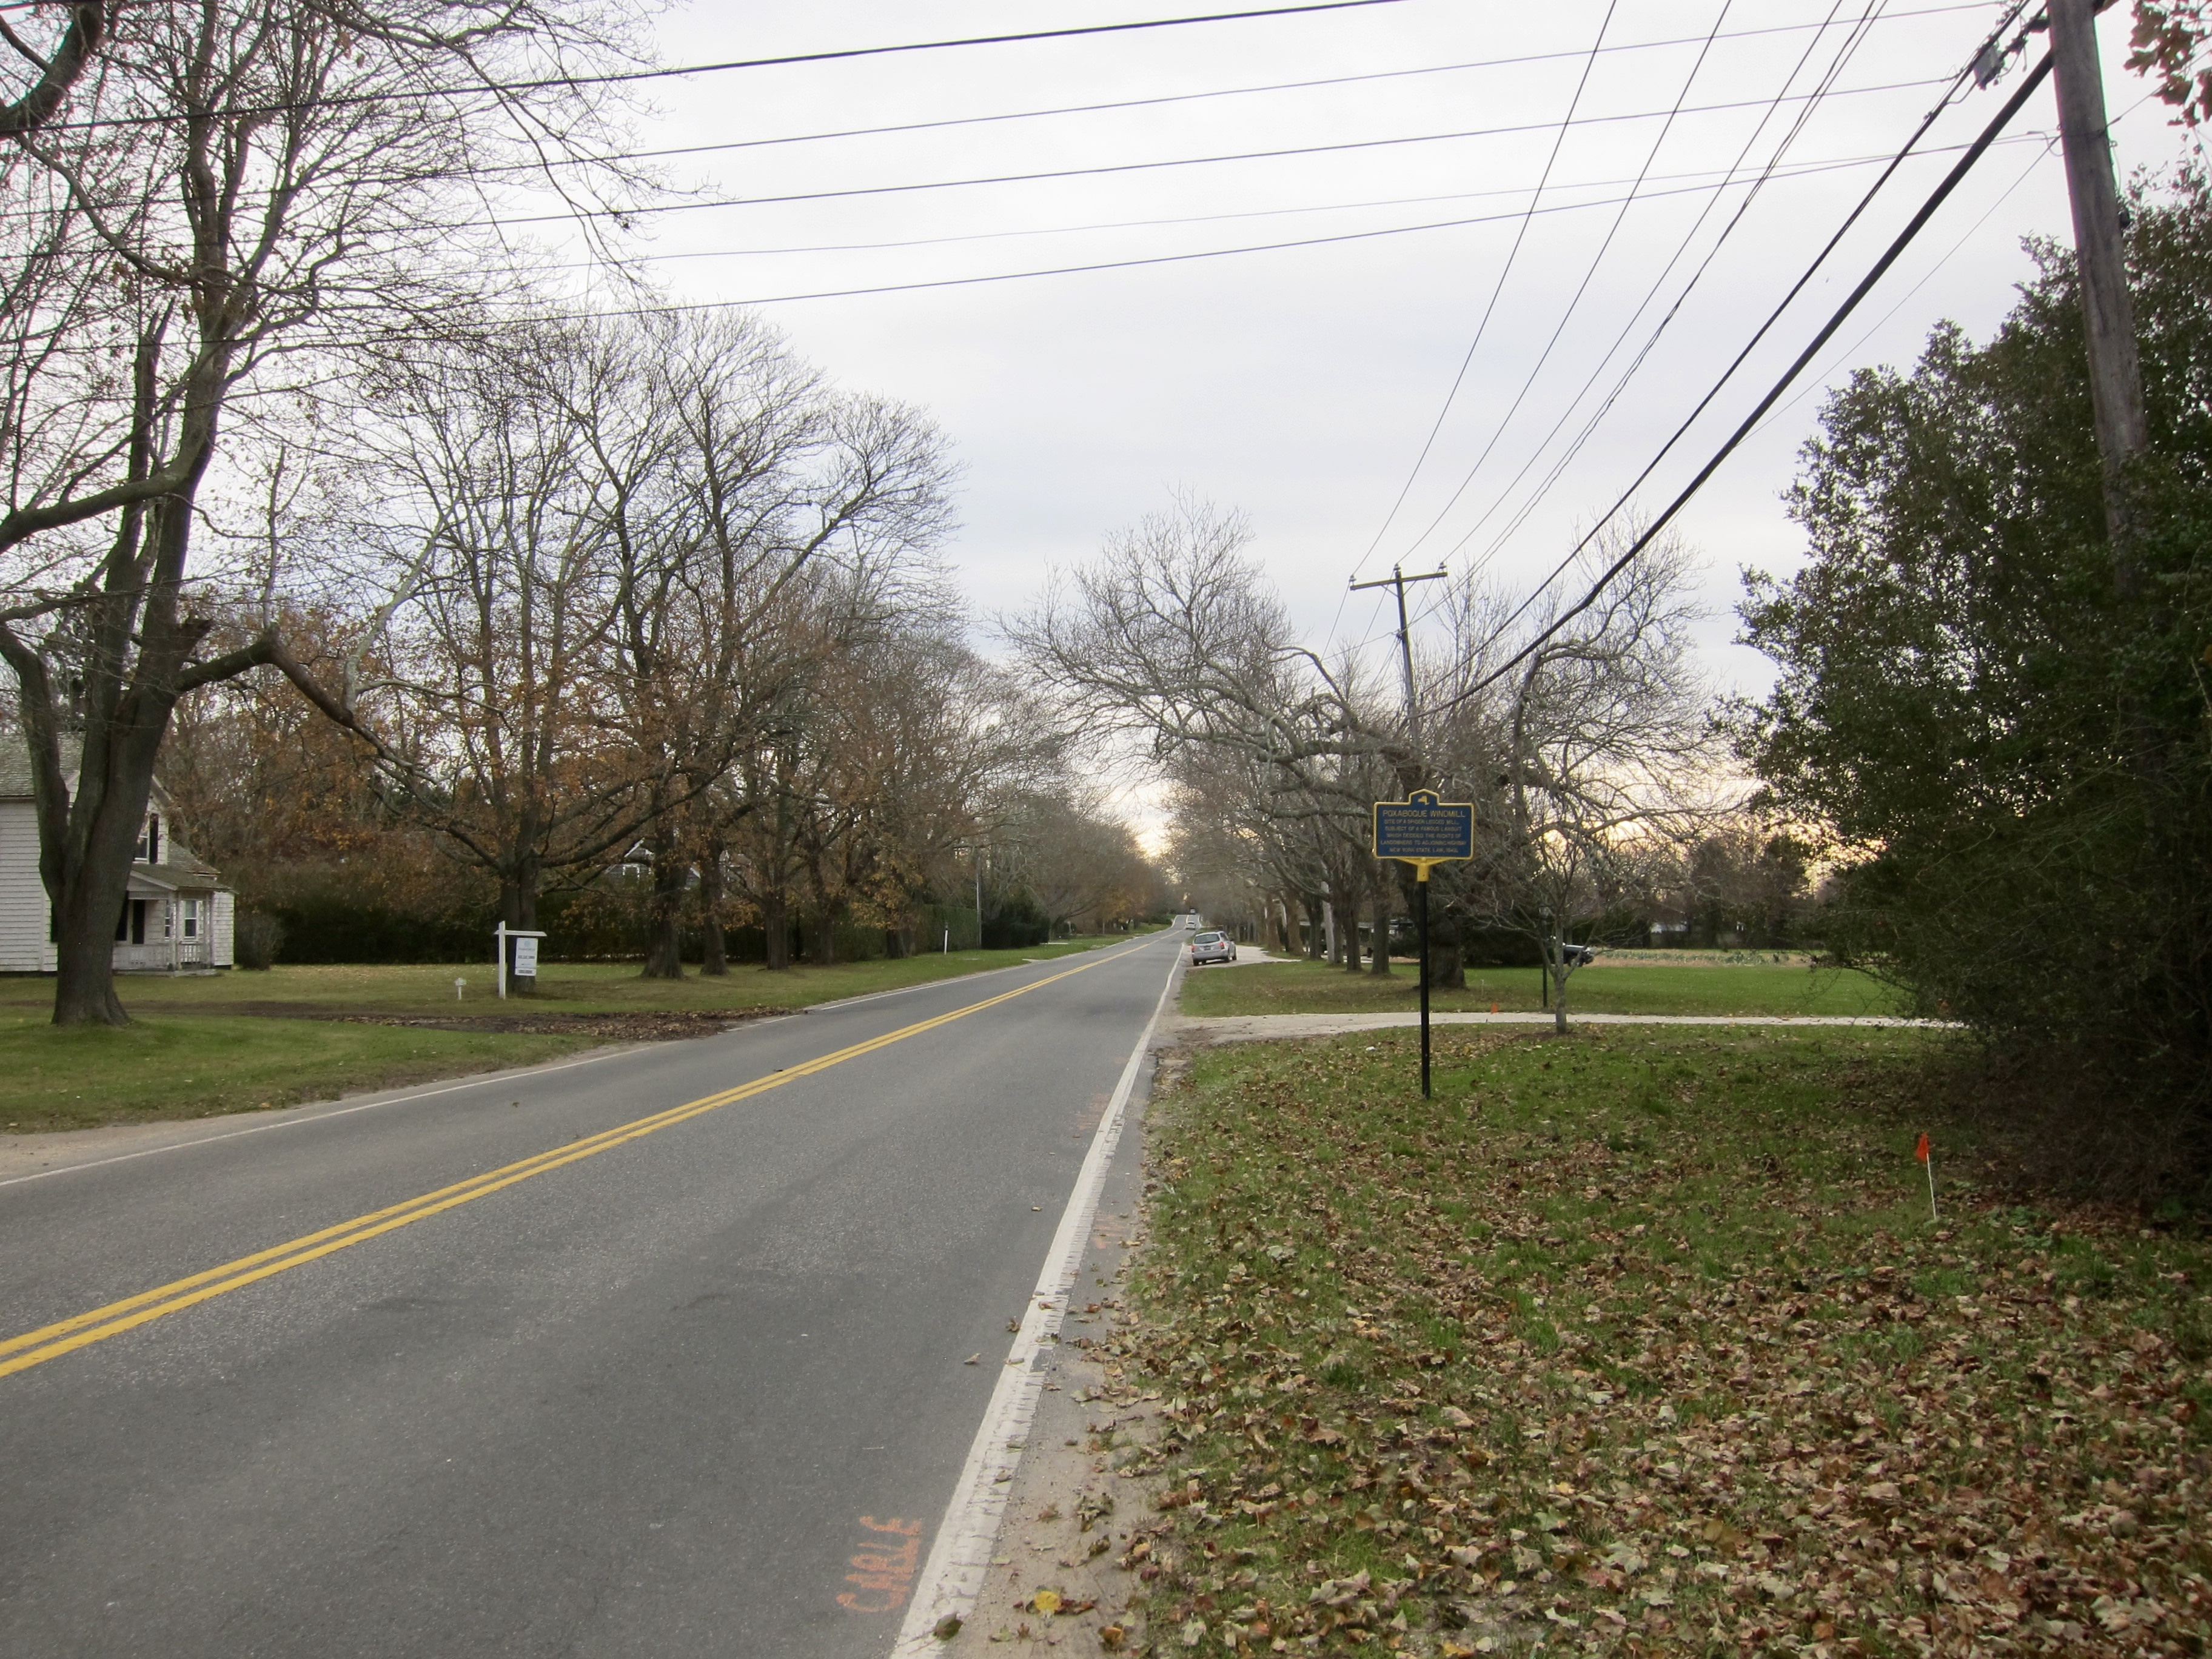 Poxabogue Windmill Marker - Wide View, Looking South on Sagg Main Street